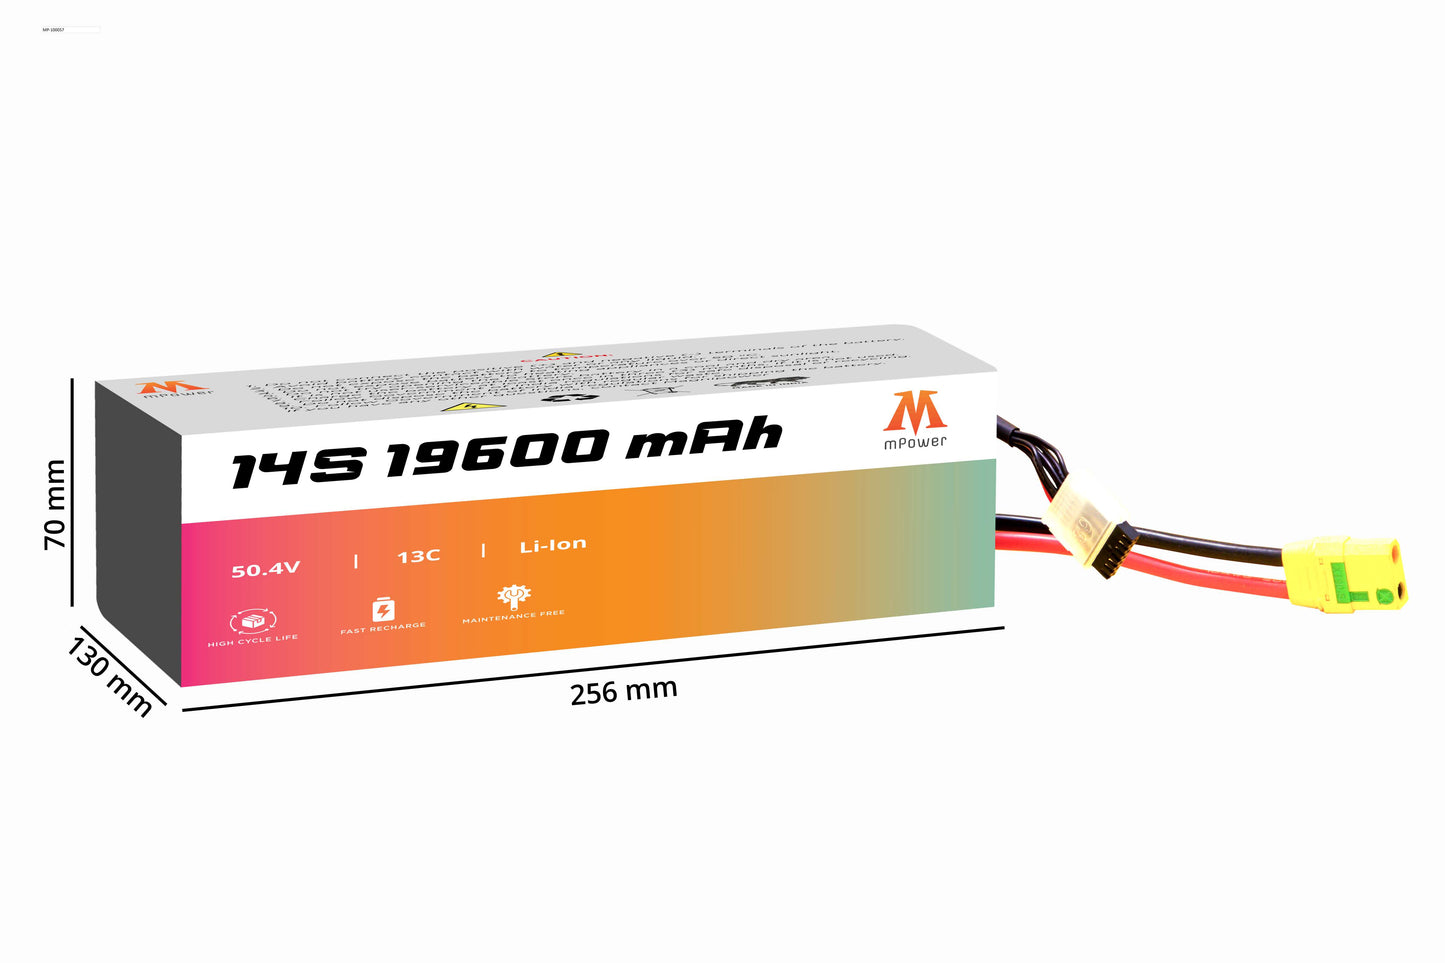 mPower 14S 19600mAh Lithium-Ion Battery for Survey Drones-mpowerlithium